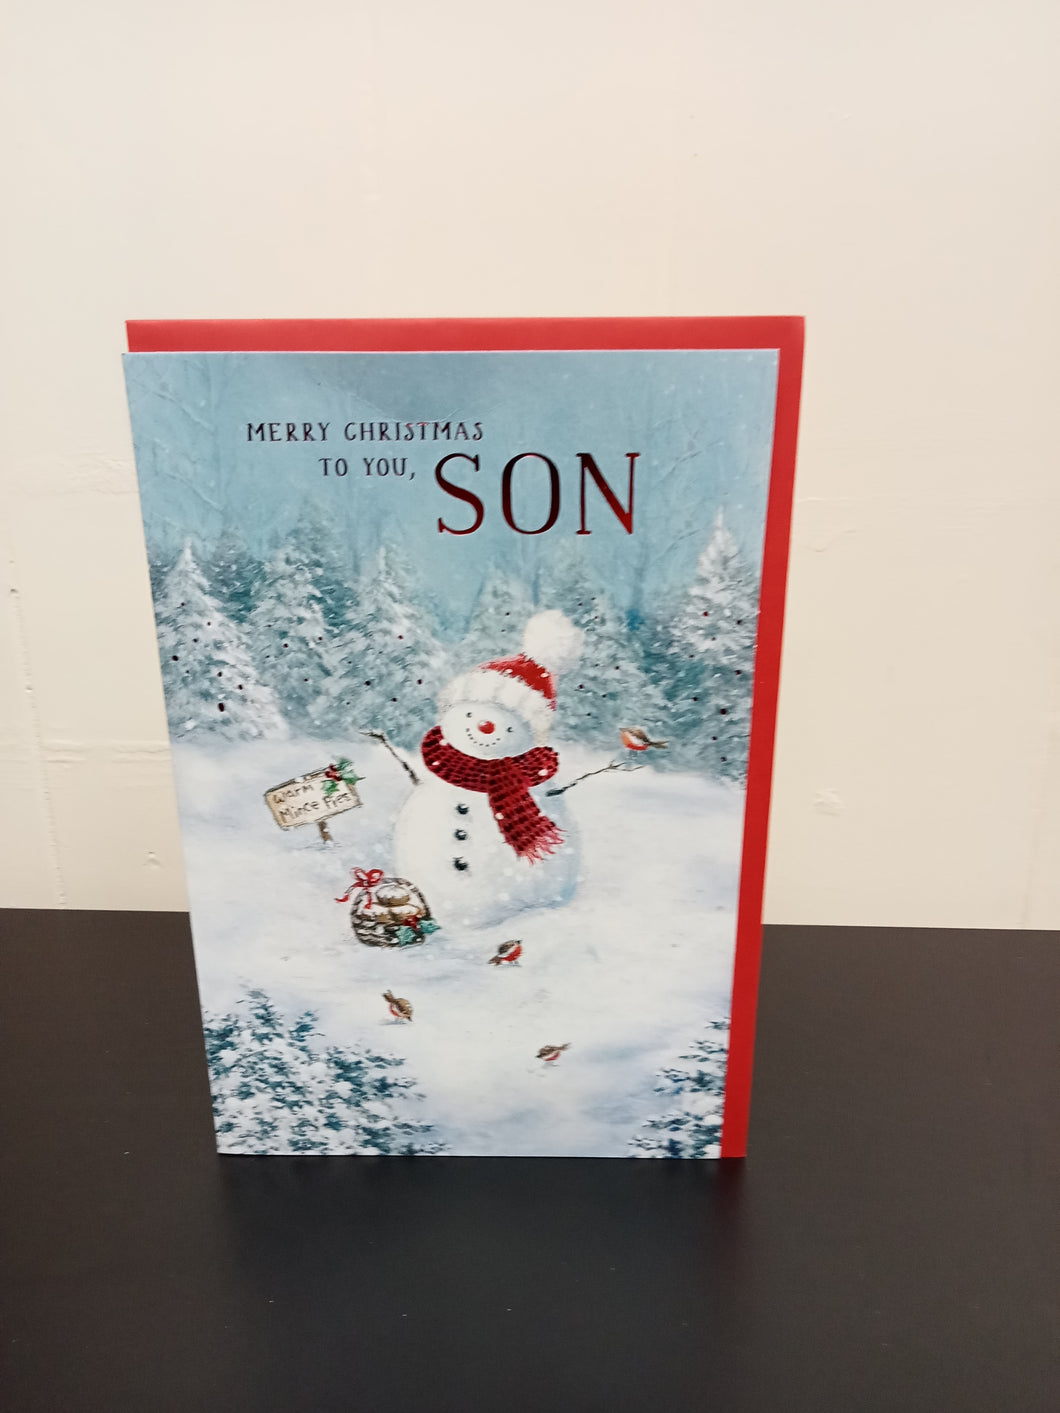 Son Merry Christmas to you, Son